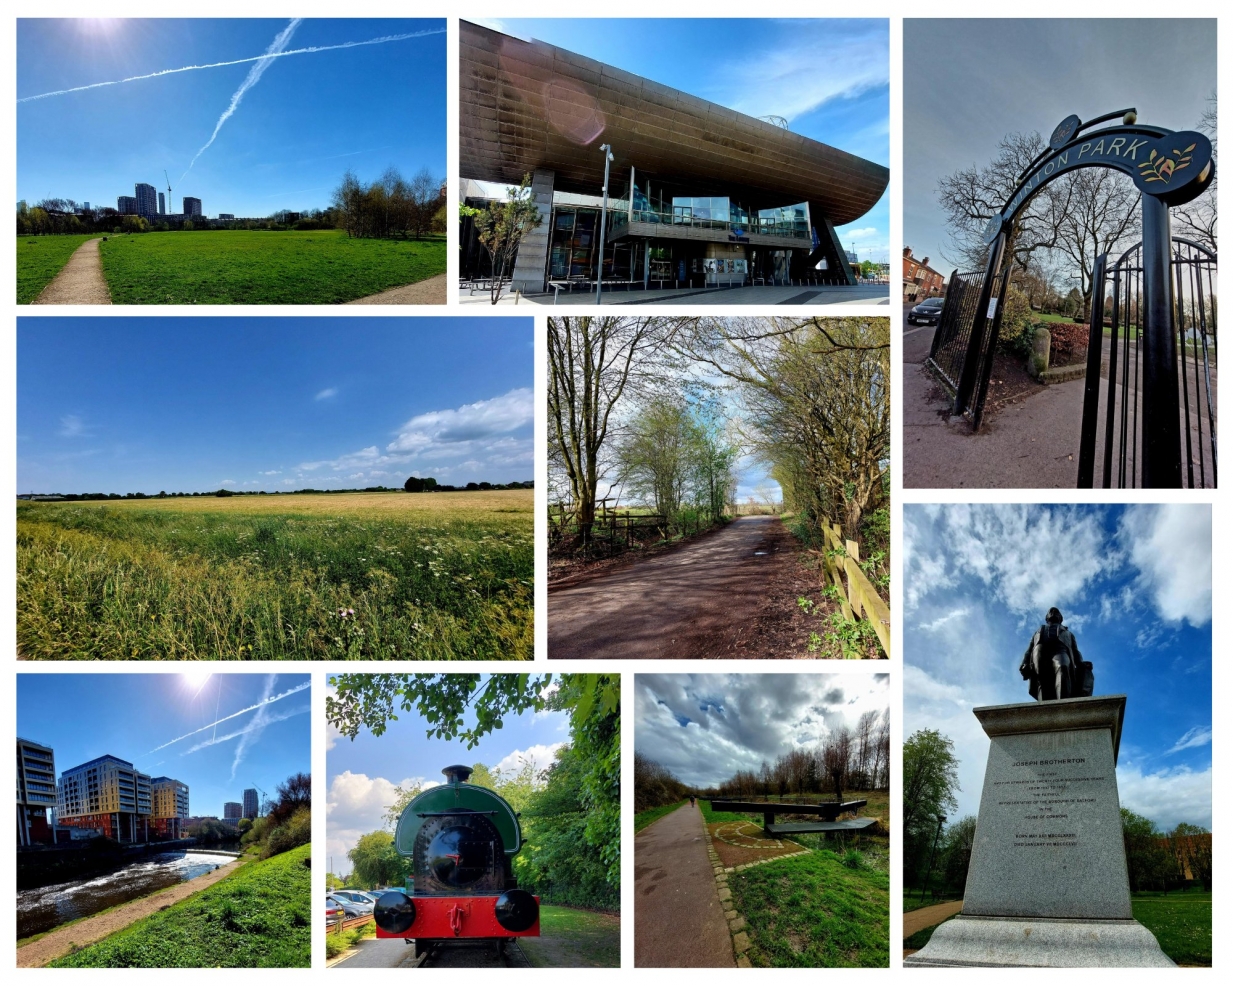 A photo montage of places outdoors in Salford that include a park gate, a statue, a train, a field, the sky.